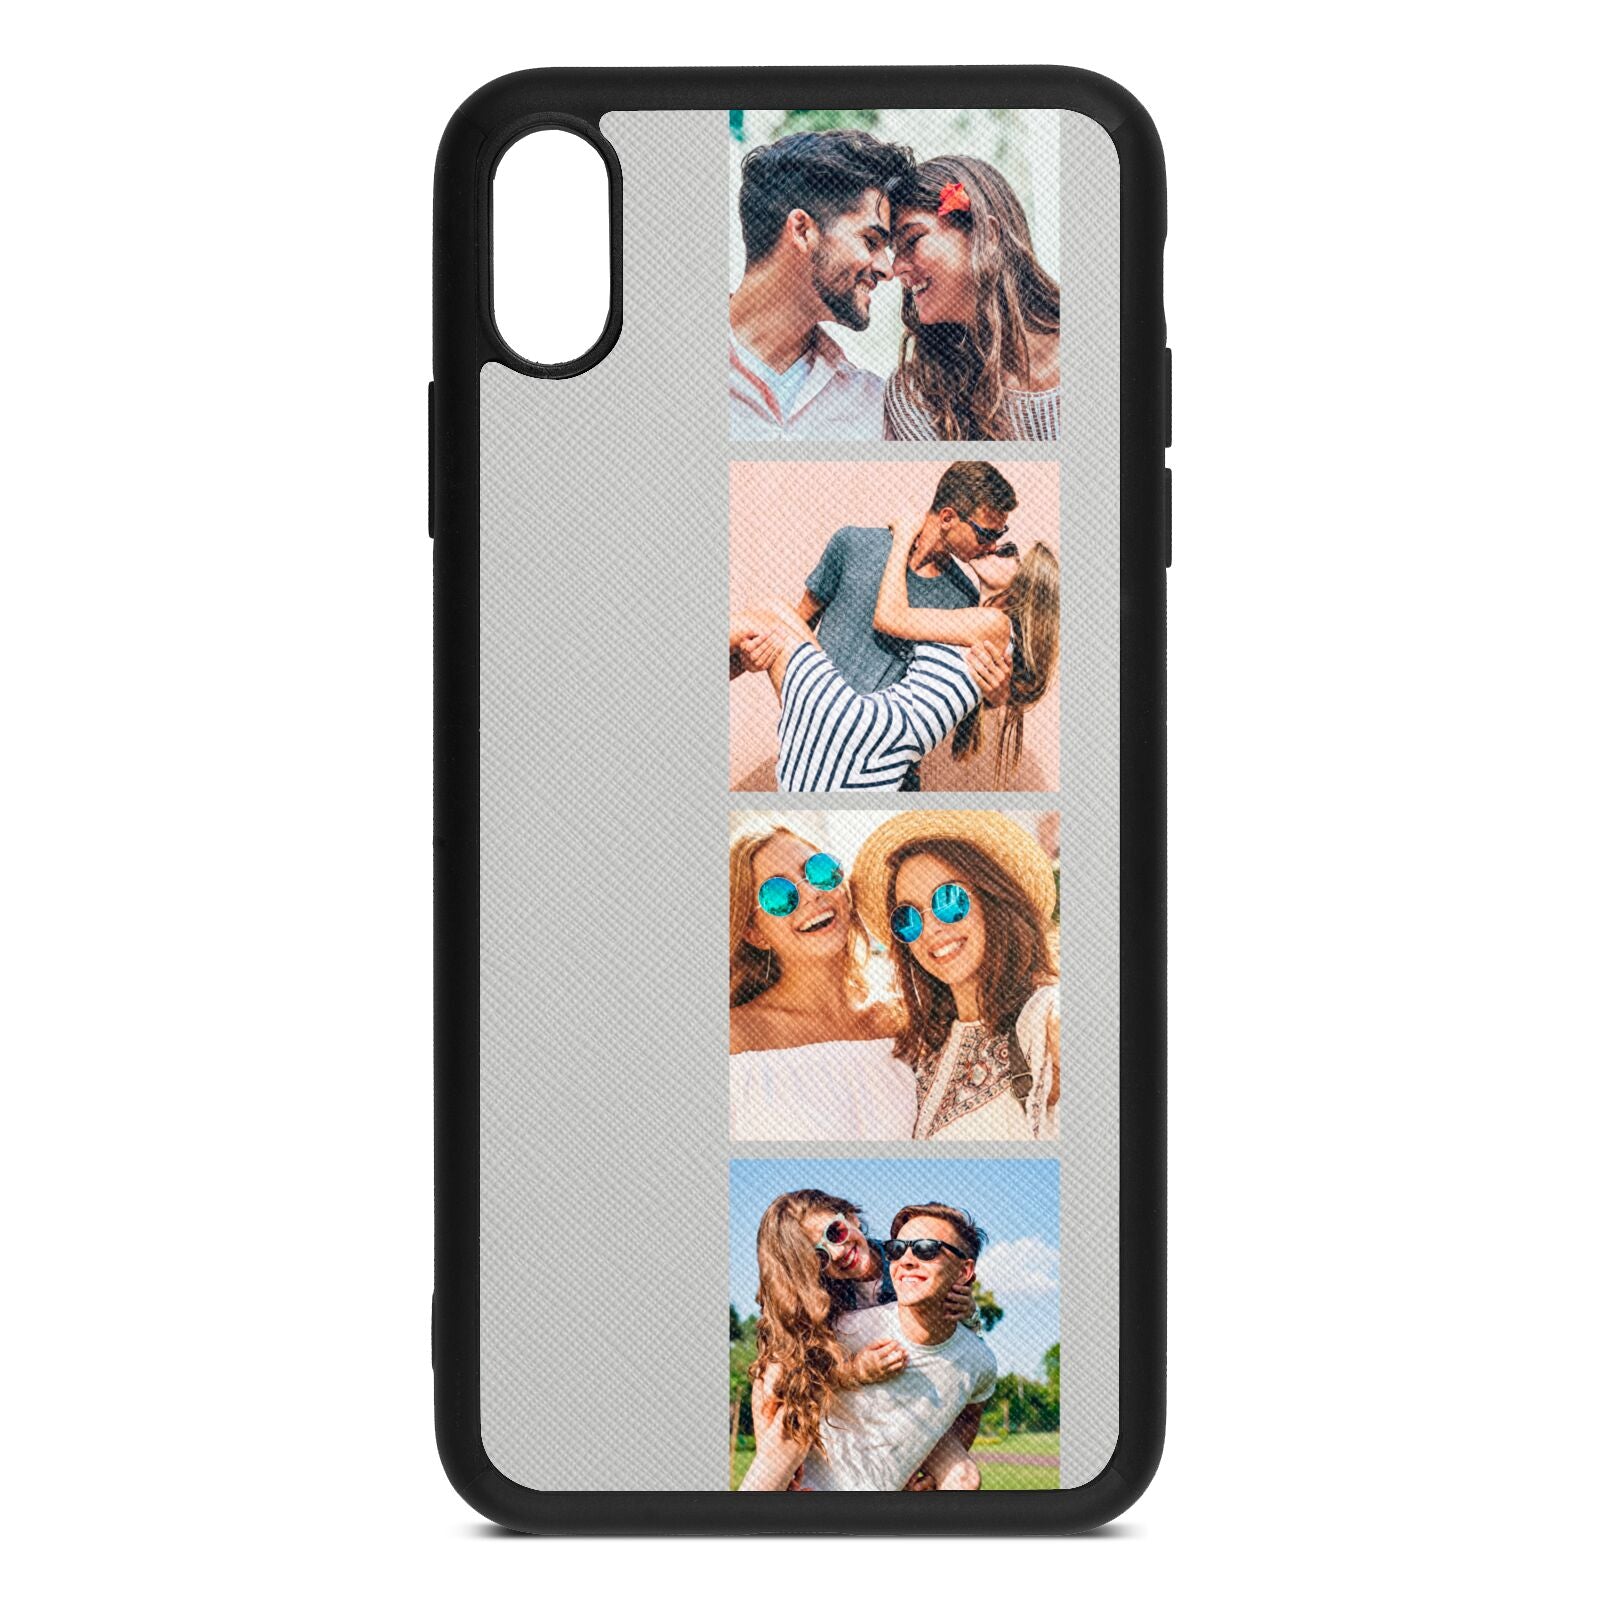 Photo Strip Montage Upload Silver Saffiano Leather iPhone Xs Max Case